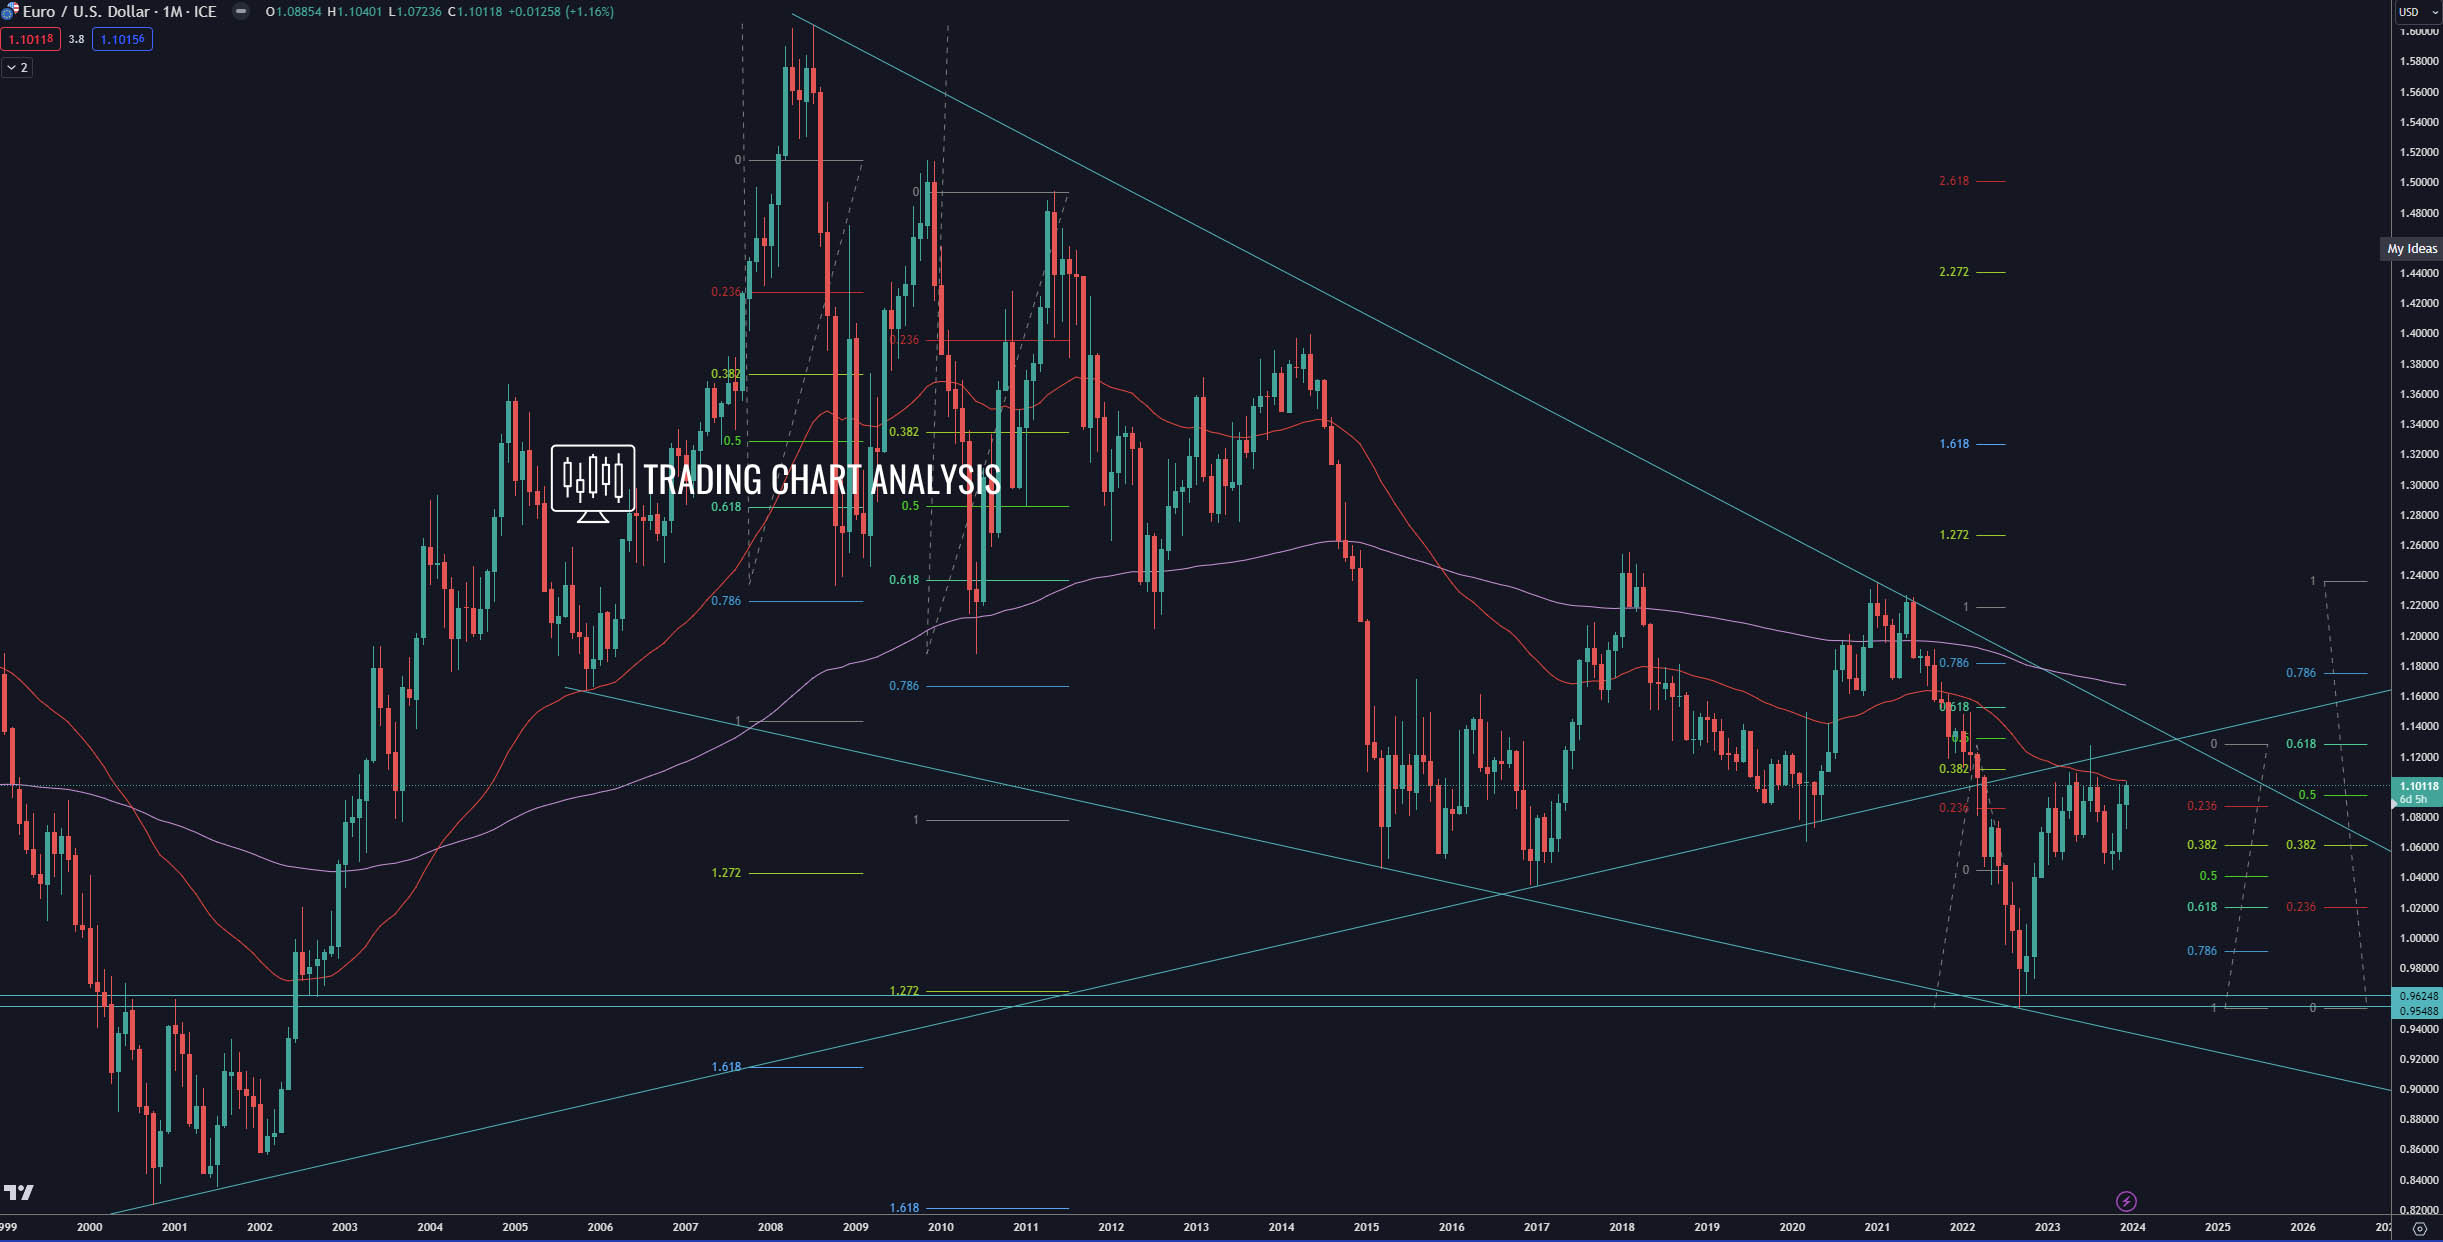 EUR/USD monthly chart analysis